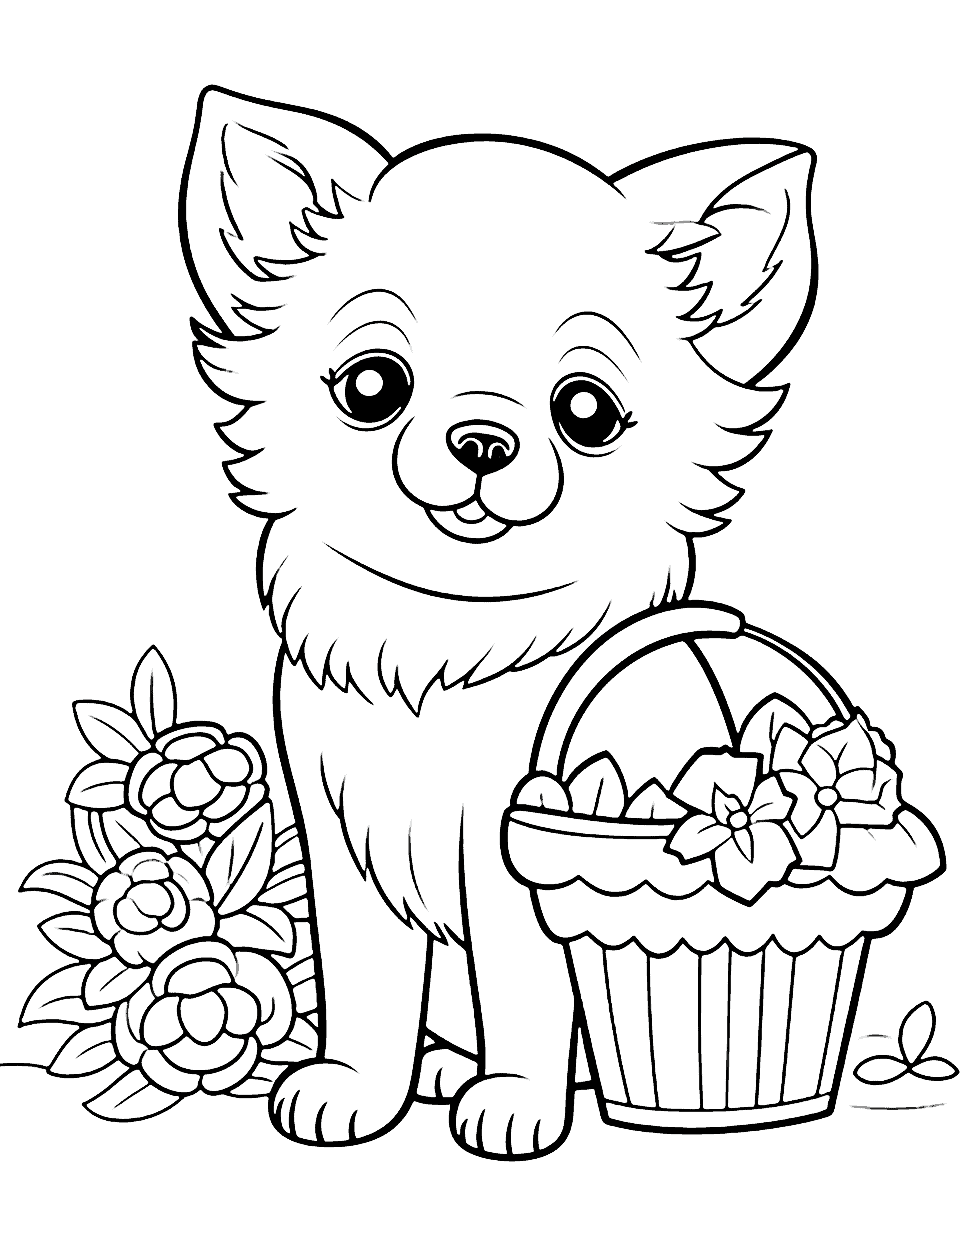 Fluffy Companion Pomeranian in a Basket Puppy Coloring Page - An adorable Pomeranian puppy sitting in a basket filled with flowers.